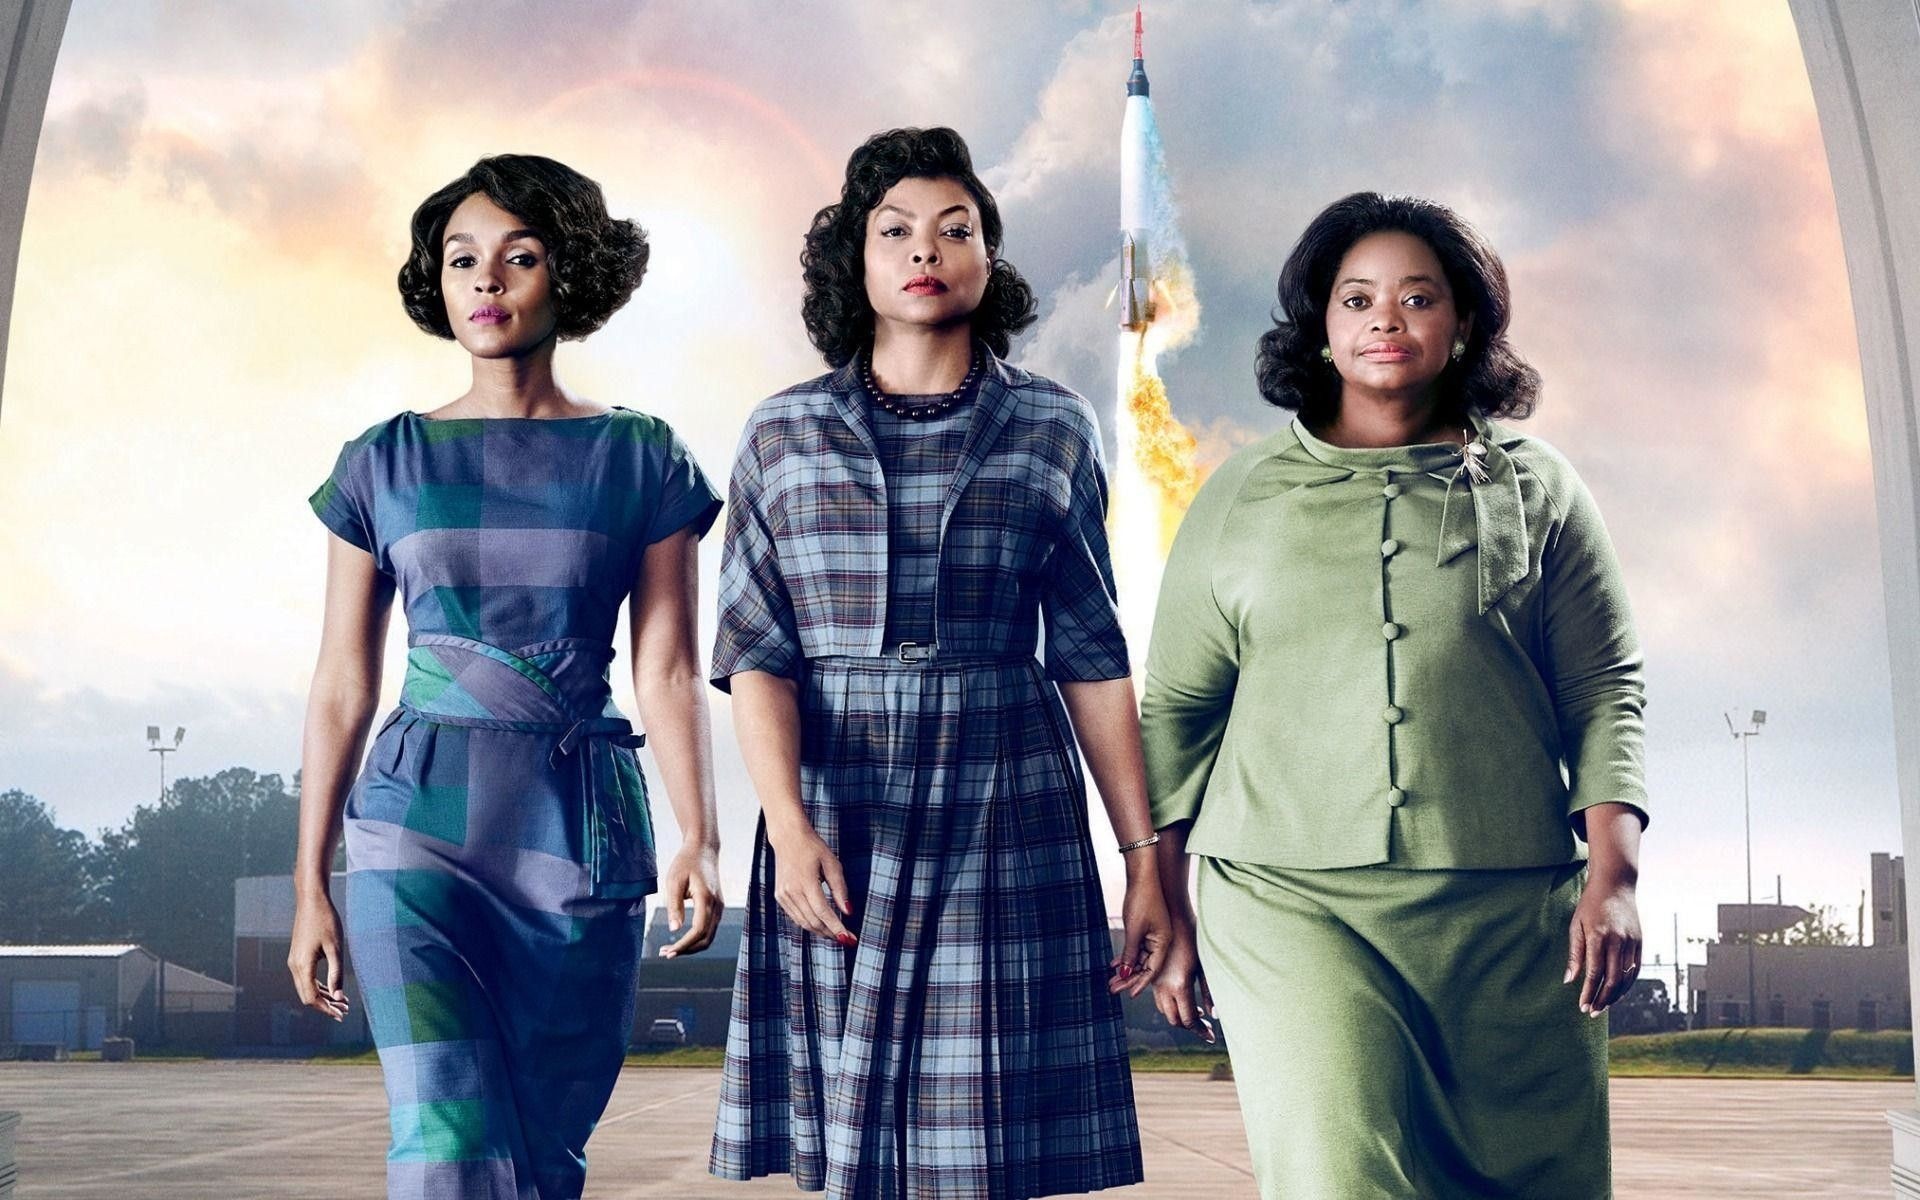 Hidden Figures: The film grossed $236 million worldwide against its $25 million production budget. 1920x1200 HD Wallpaper.